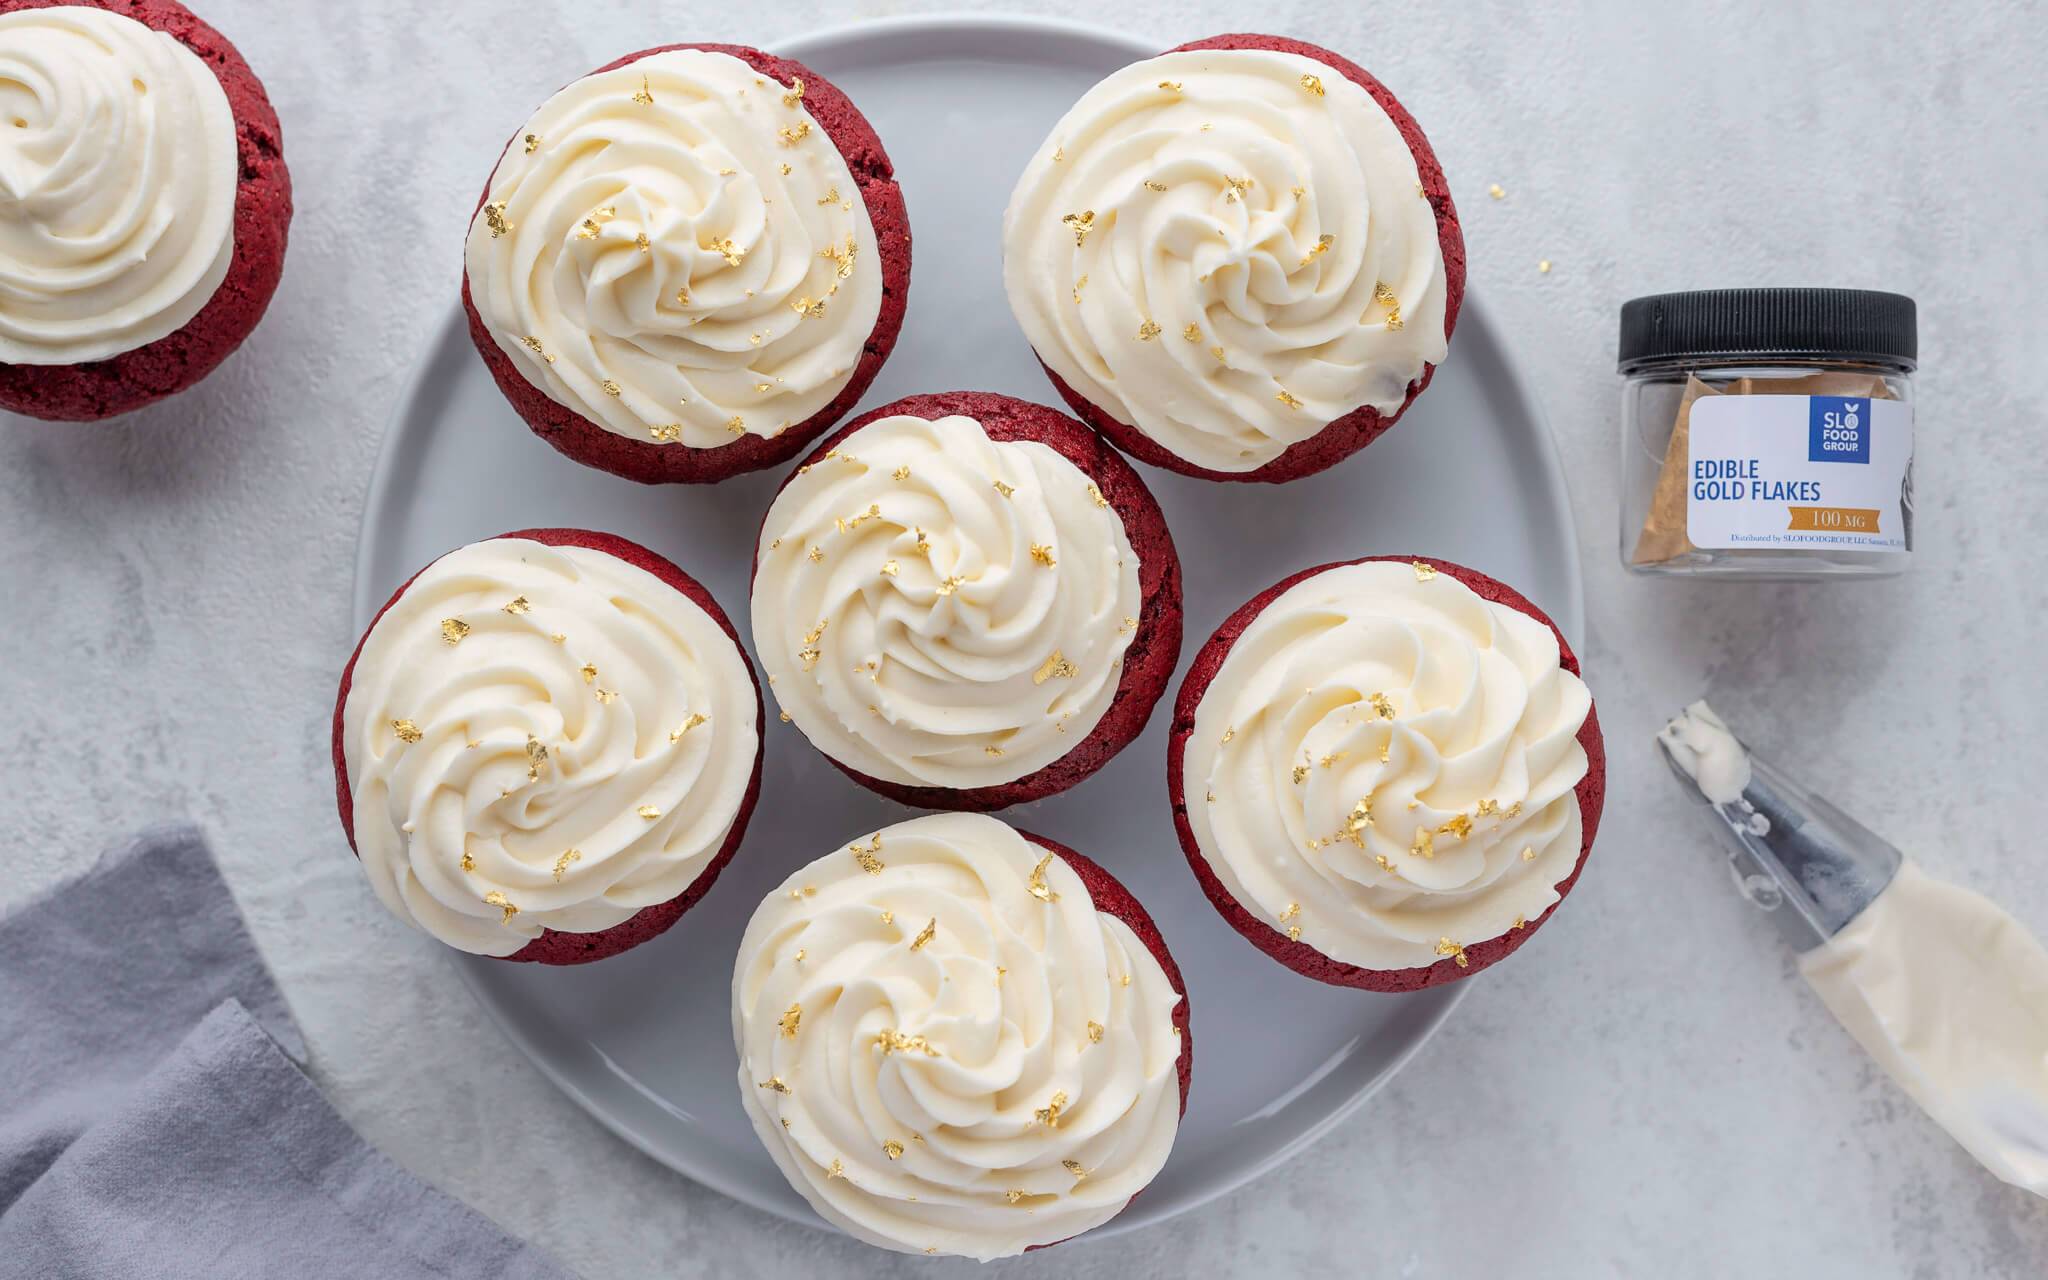 Red Velvet Cupcakes with Vanilla Bean Cream Cheese Frosting